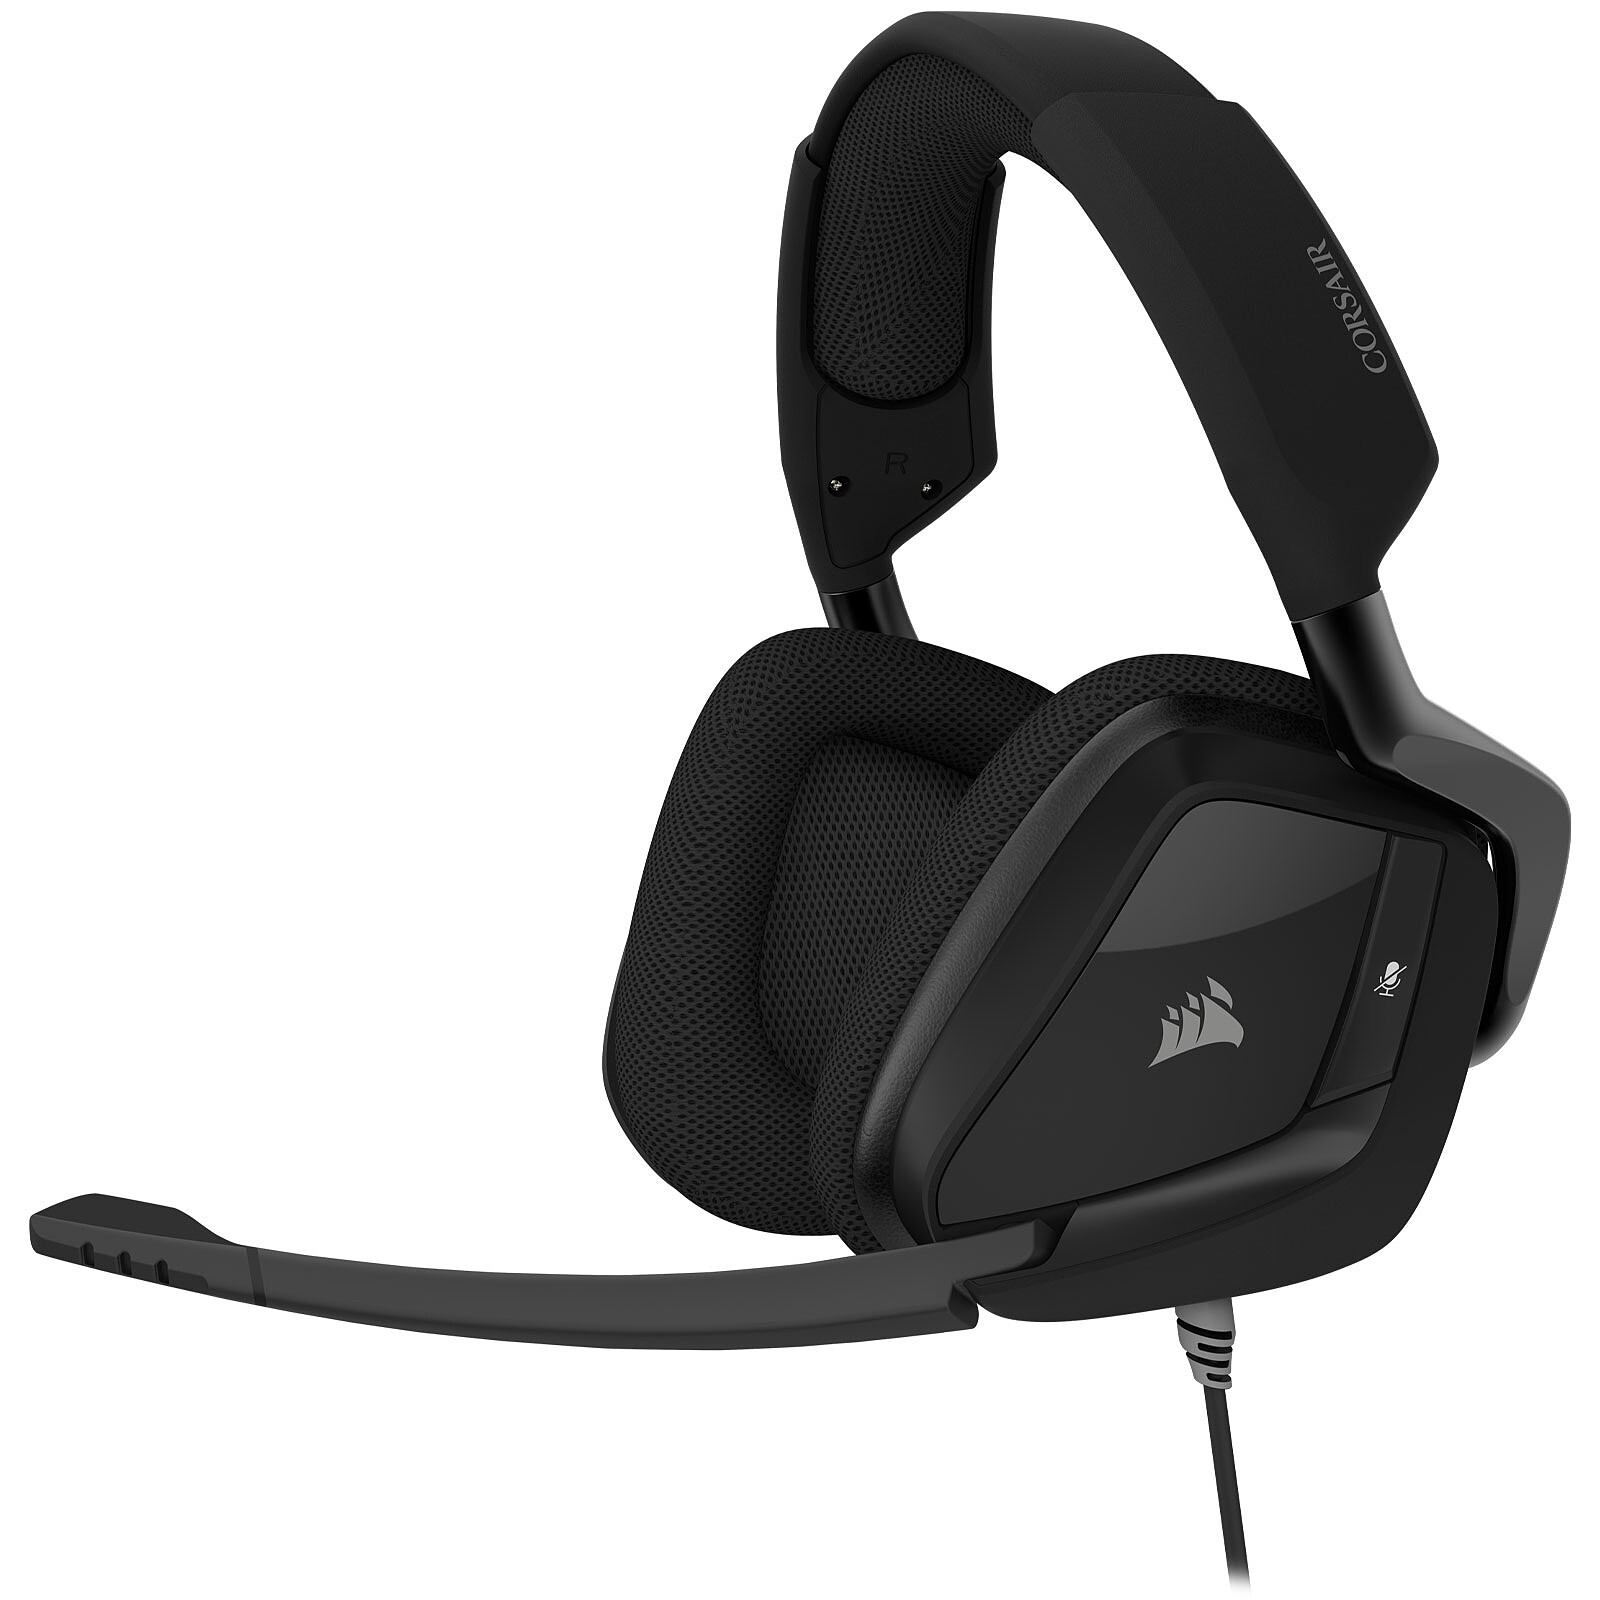 Casque-micro - son surround virtuel 7.1 - microphone omnidirectionnel - rgb  - compatible pc/ps4 SPIRIT OF GAMER Pas Cher 